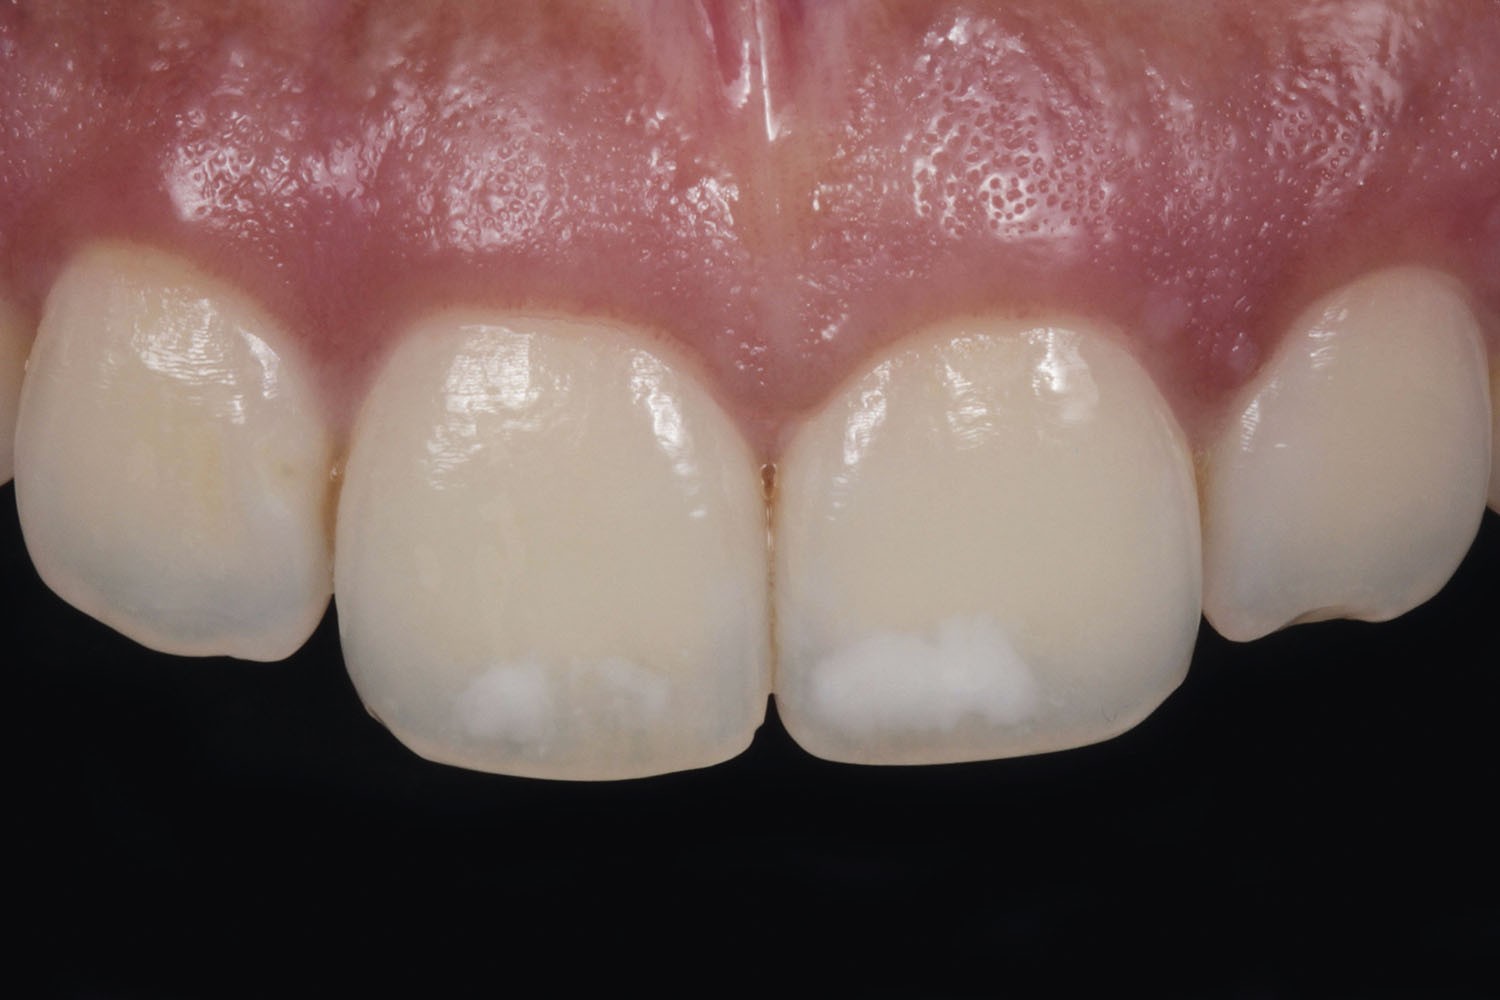 Aesthetic resolution of molar-incisor hypomineralisation lesions: A conservative approach